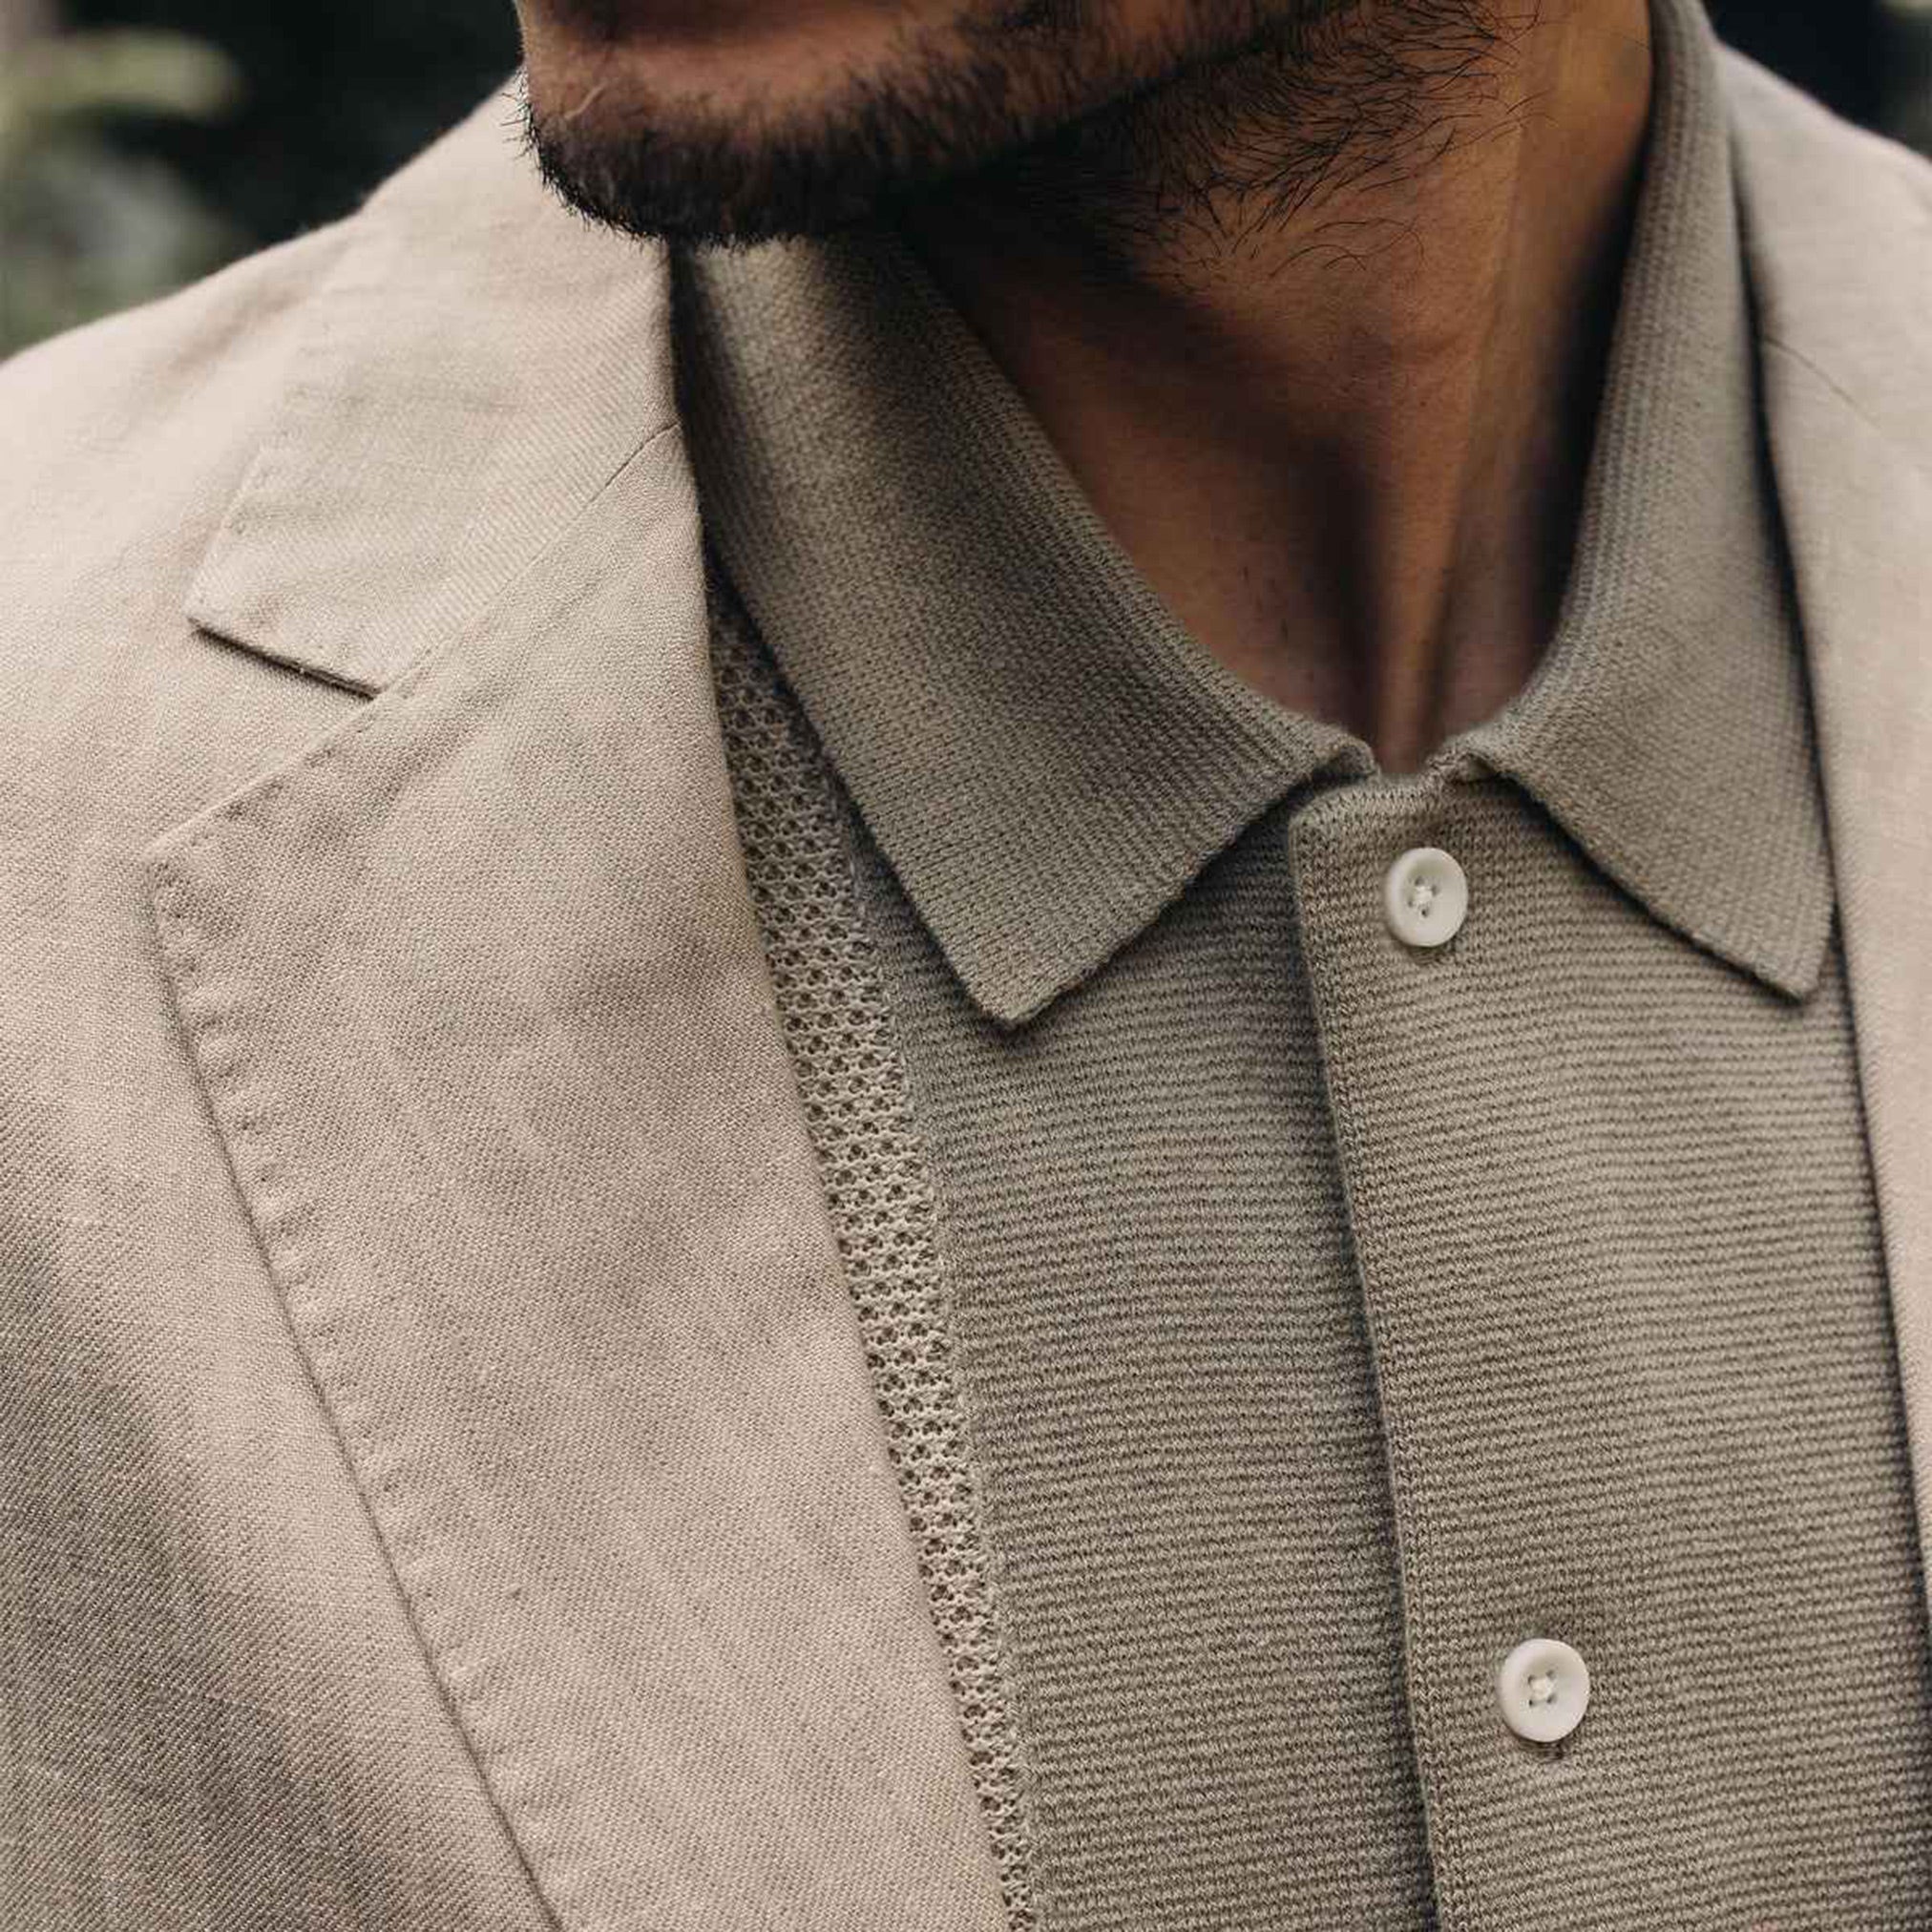 The Sheffield Sport Coat in Natural Linen